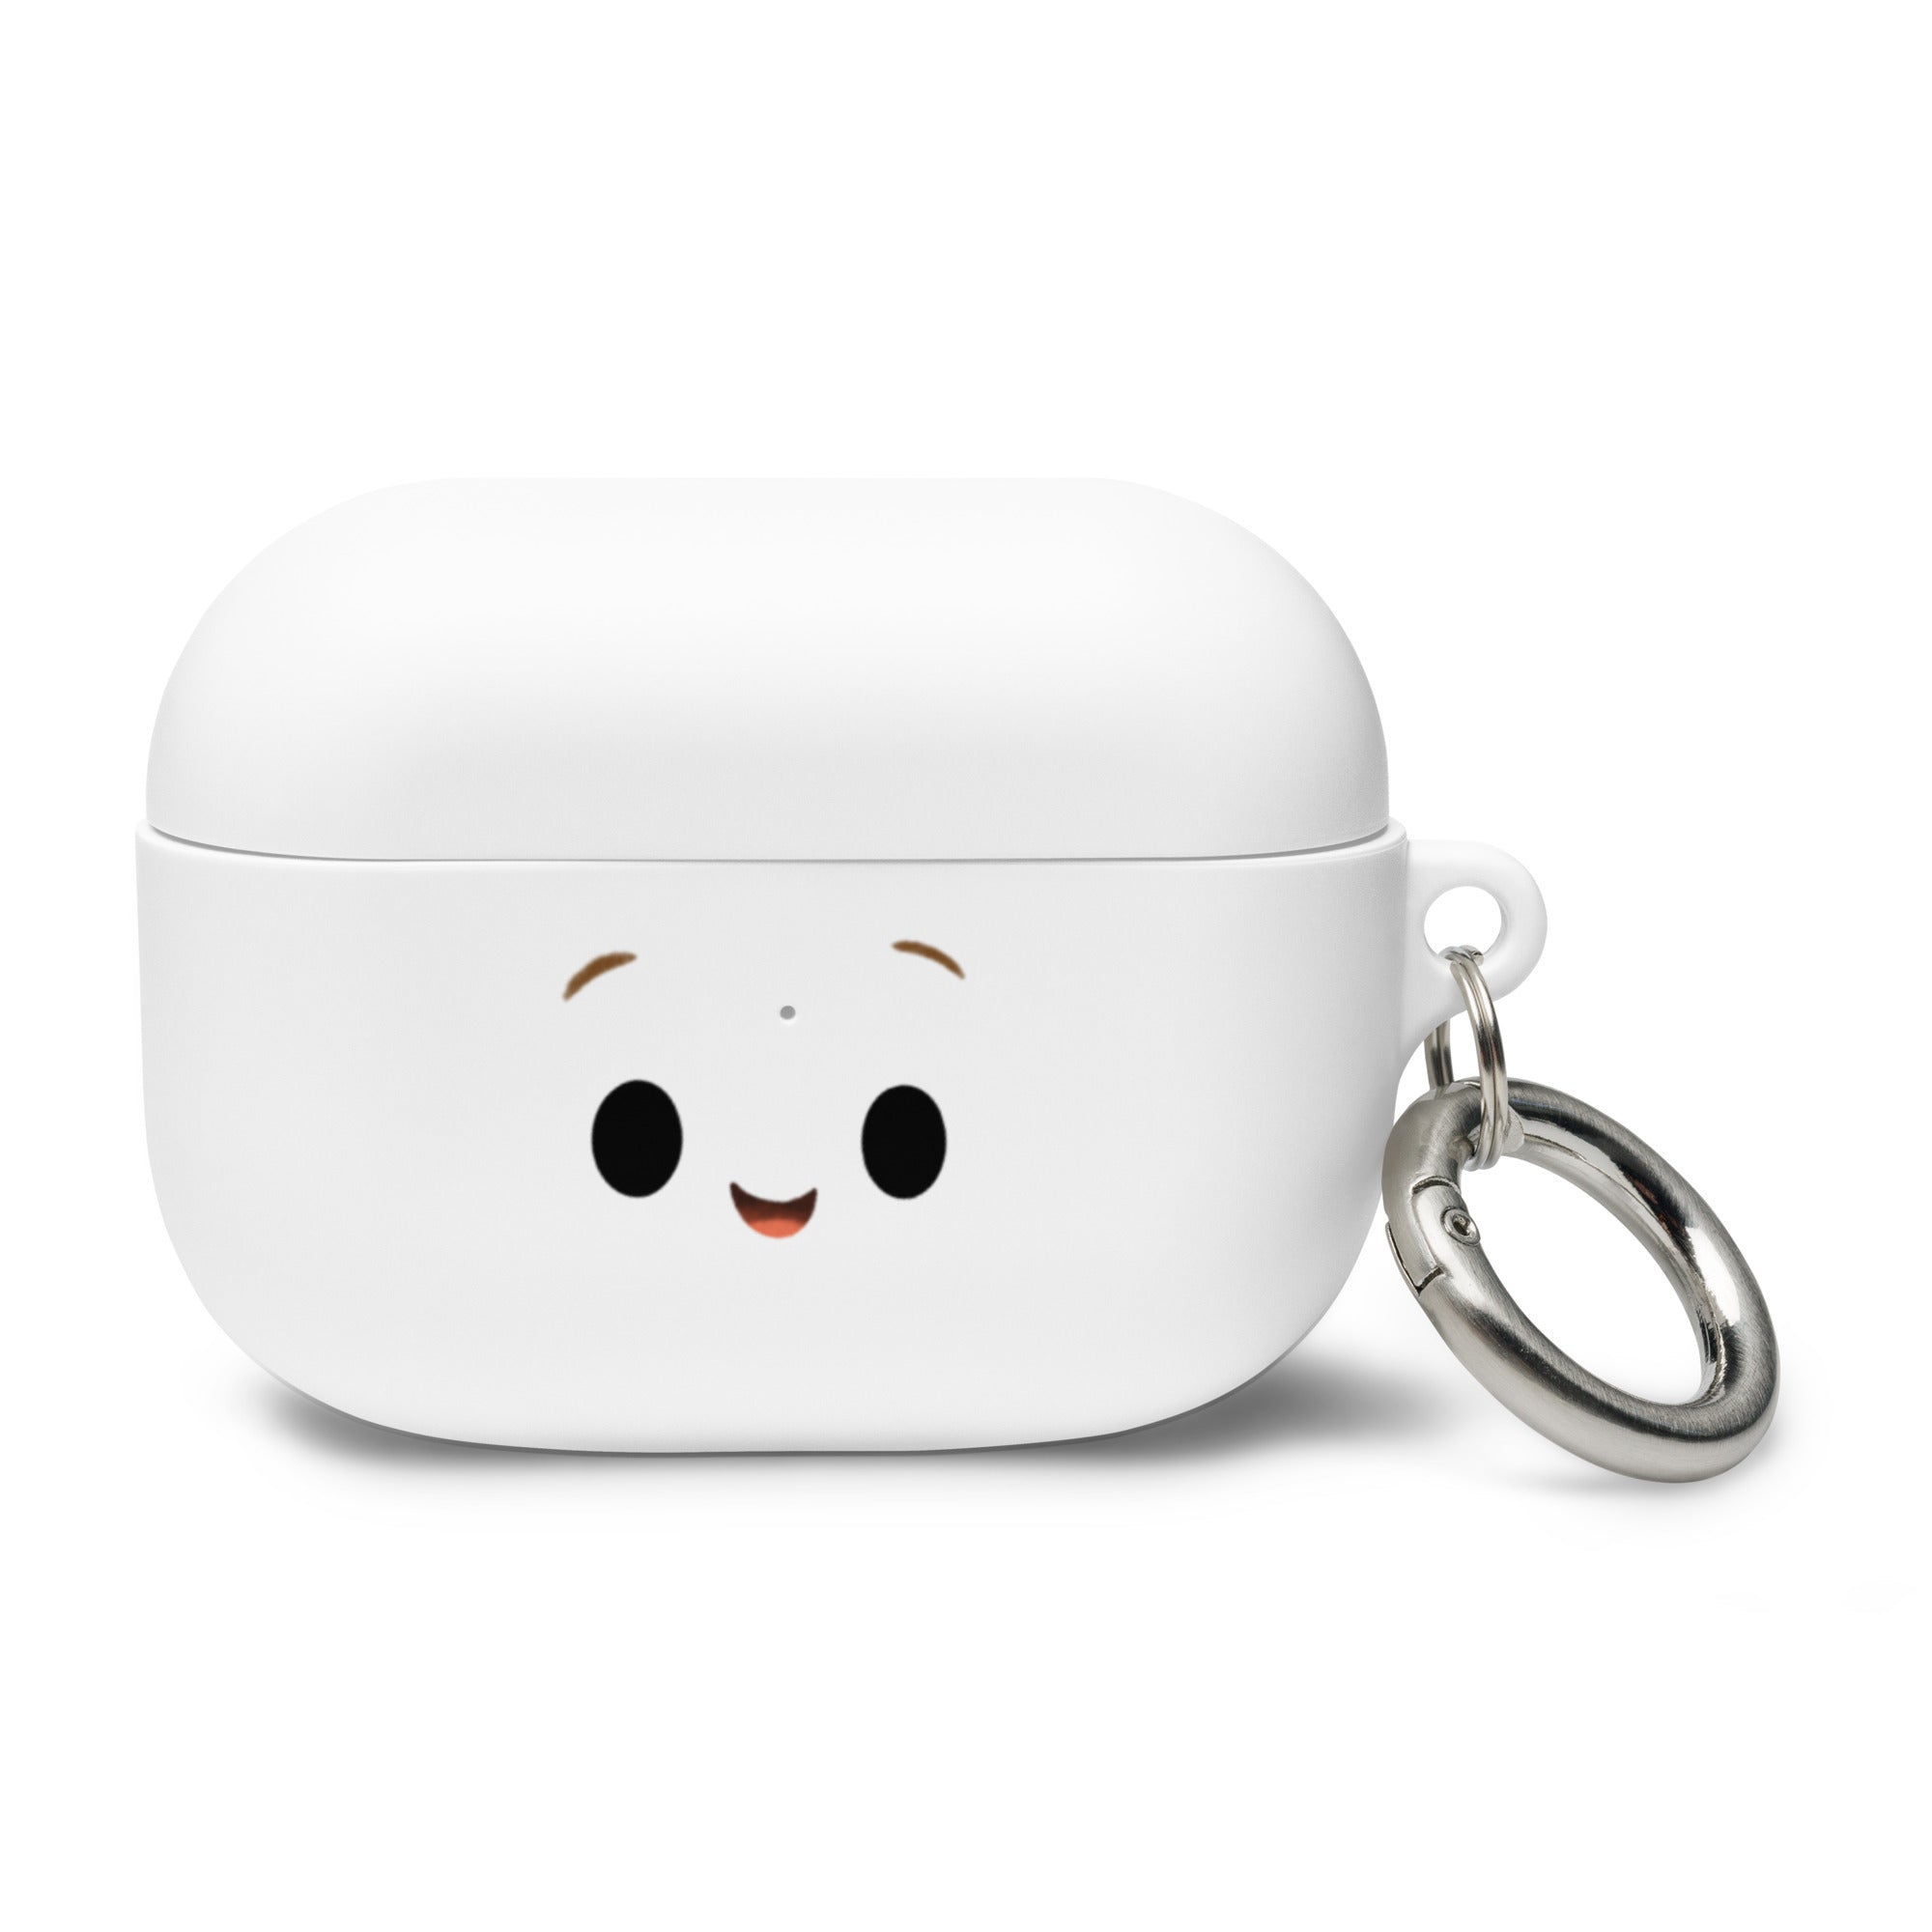 Marshmallow AirPods case